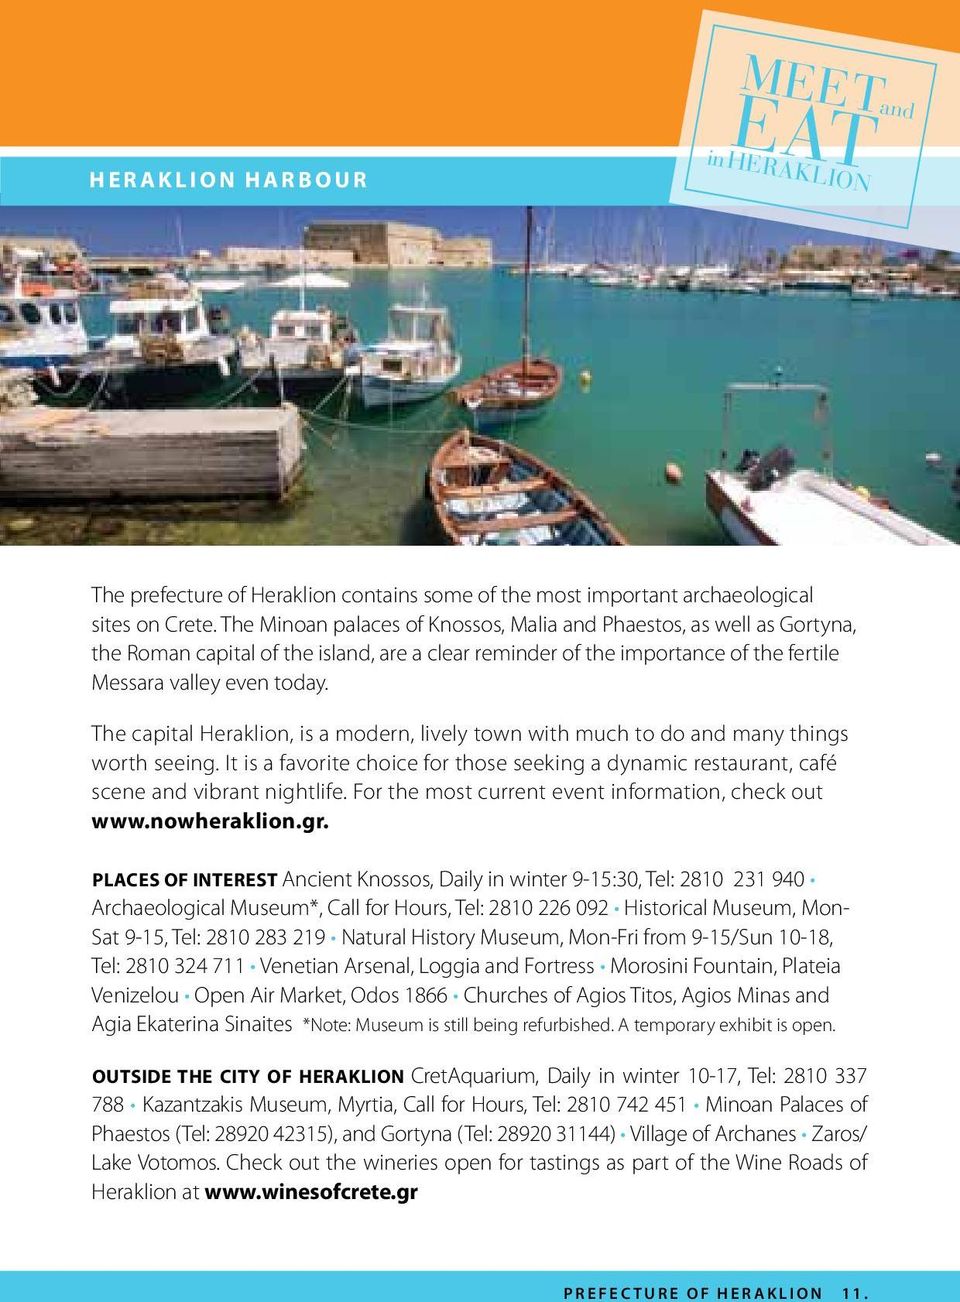 The capital Heraklion, is a modern, lively town with much to do and many things worth seeing. It is a favorite choice for those seeking a dynamic restaurant, café scene and vibrant nightlife.